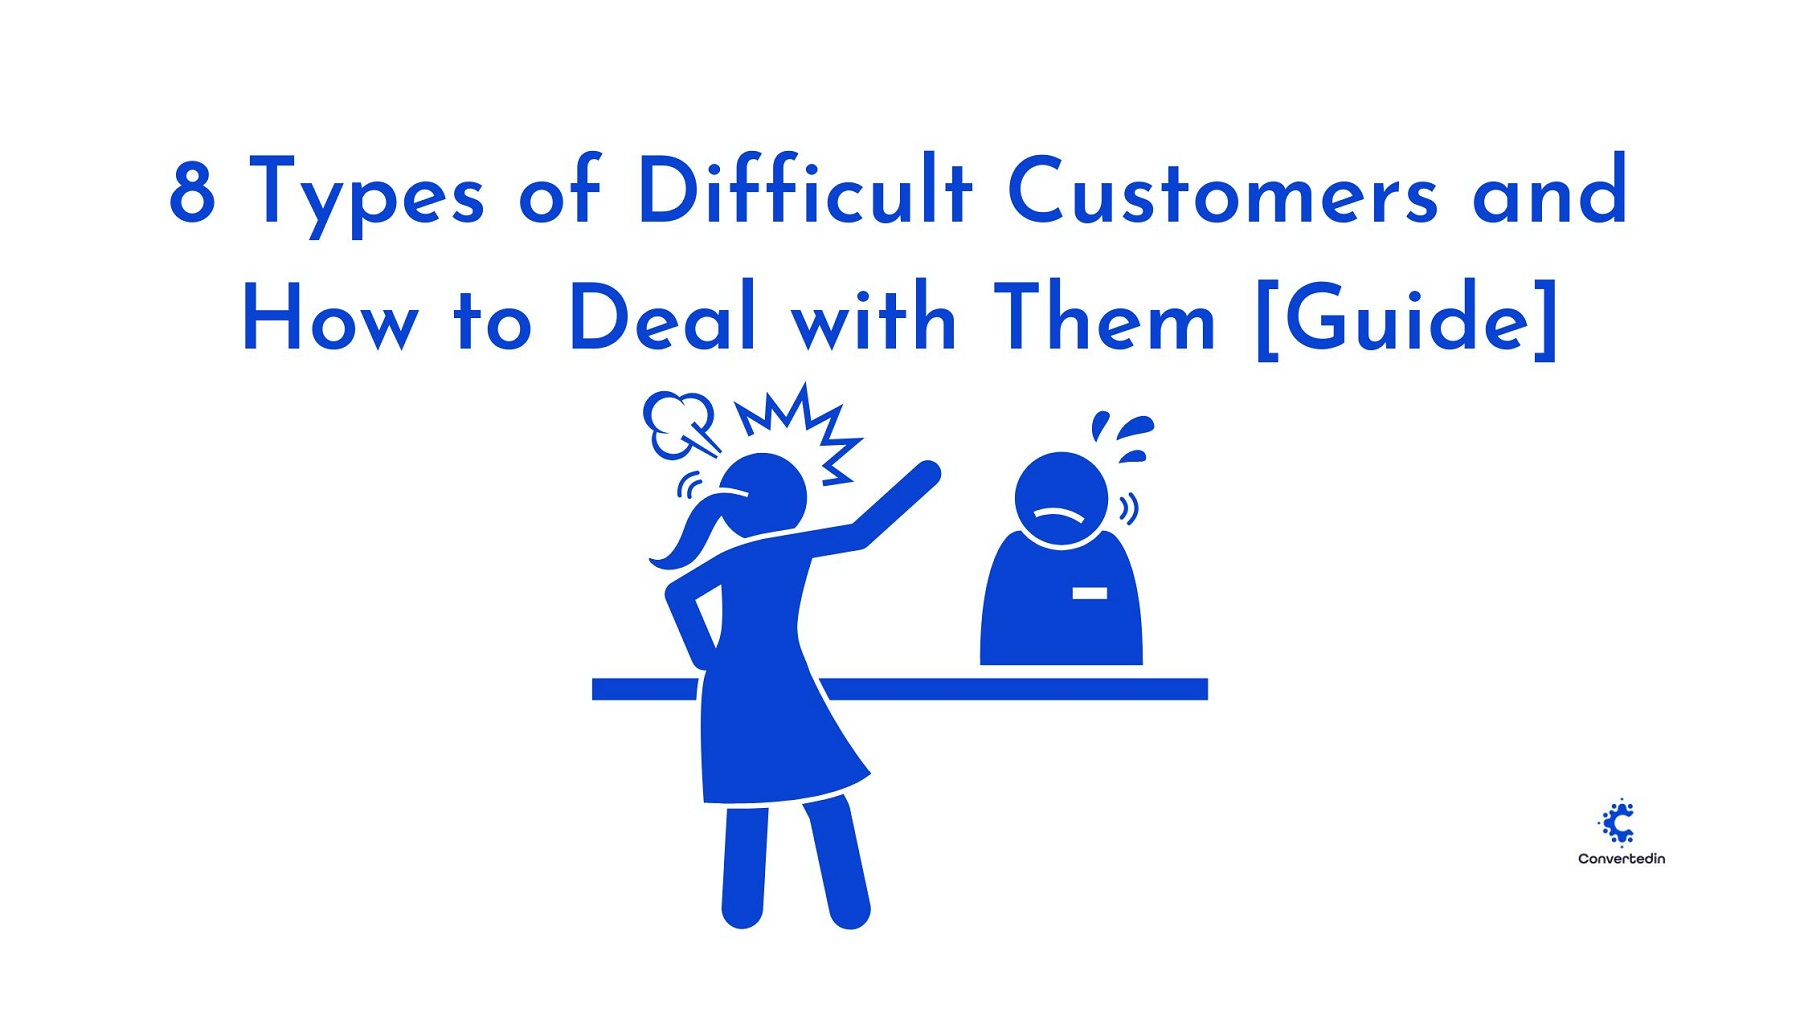 8 types of difficult customers and how to deal with them